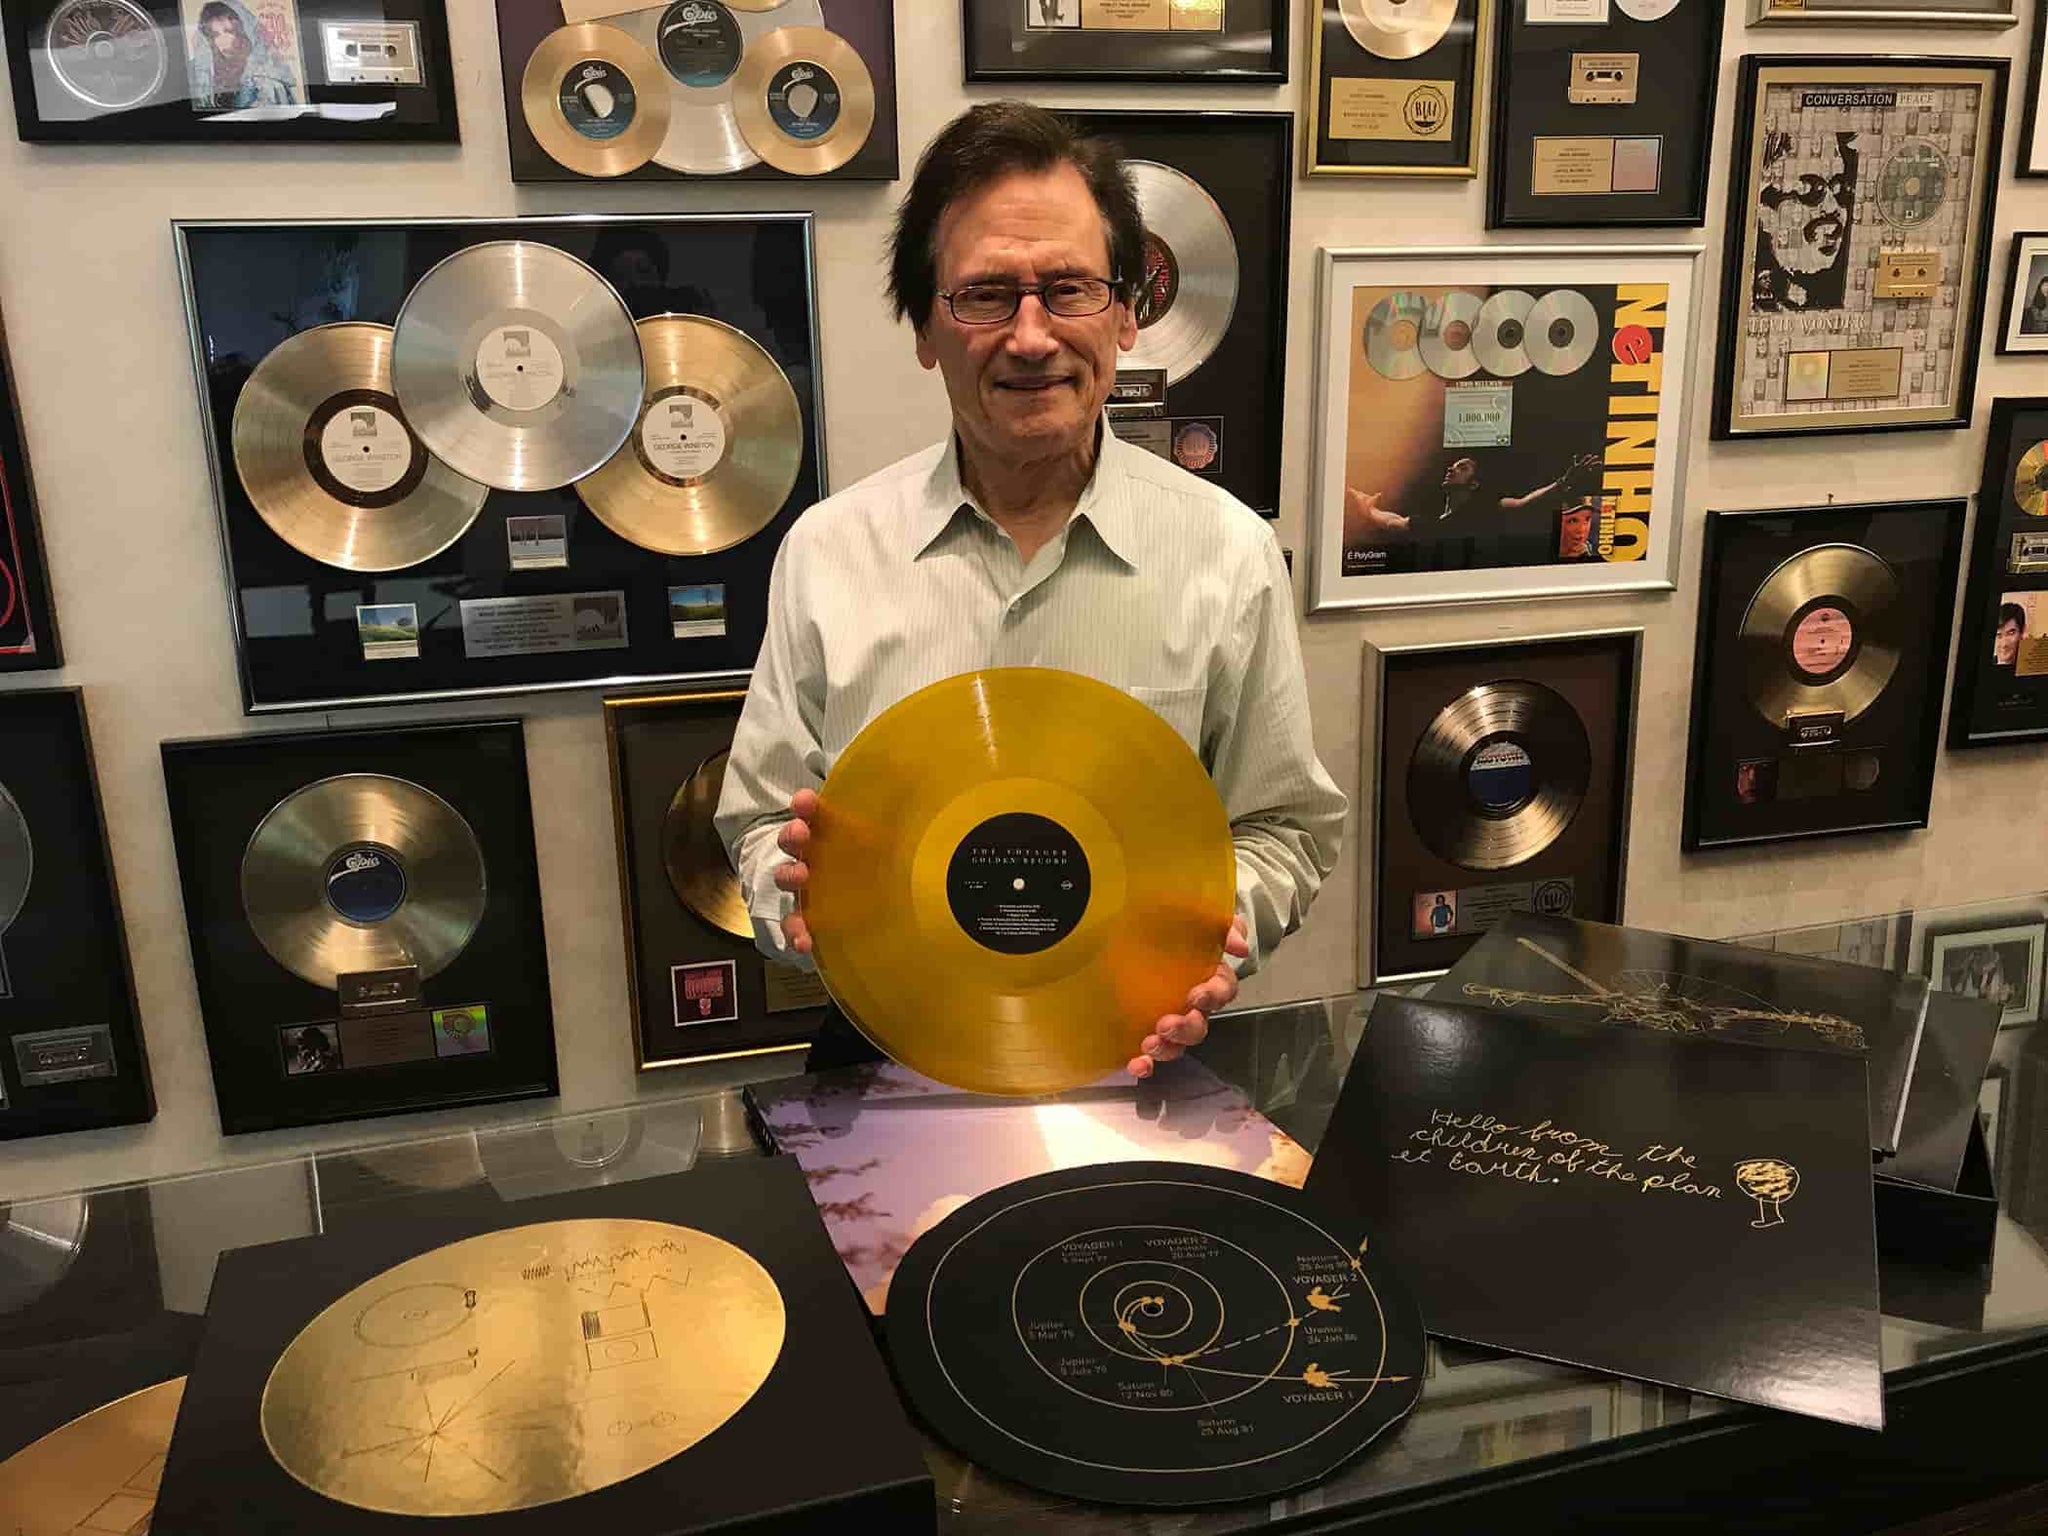 What is Voyager Golden Record?